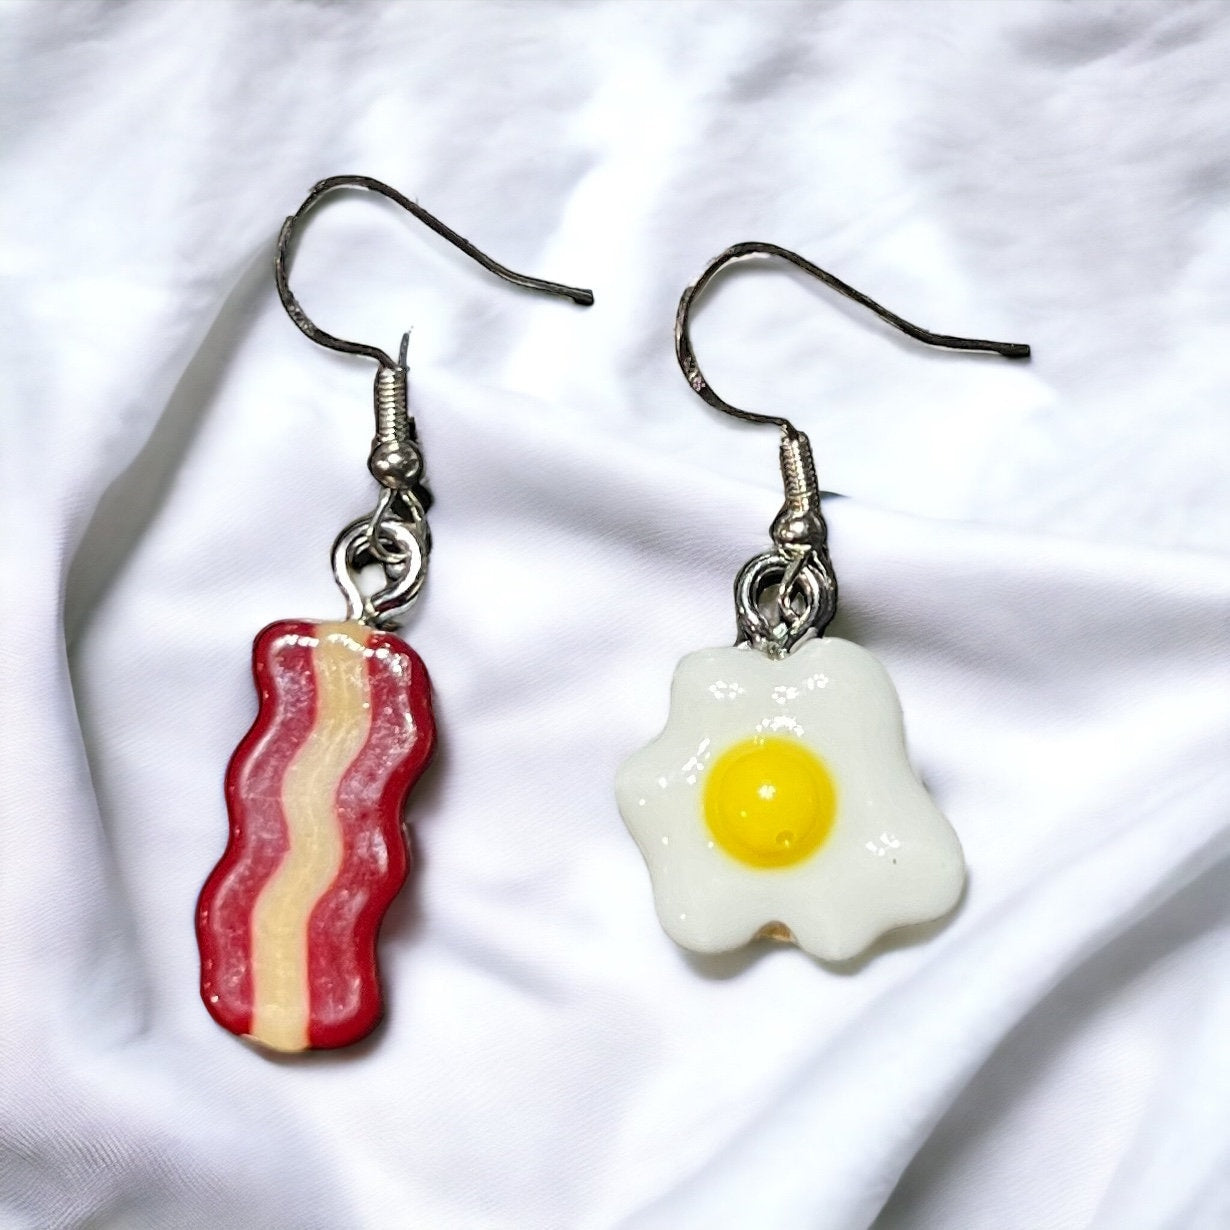 Close-up of Brunch Mini Food Earrings featuring cute Bacon and Eggs charms. Quirky and delightful accessories for foodie fashion.